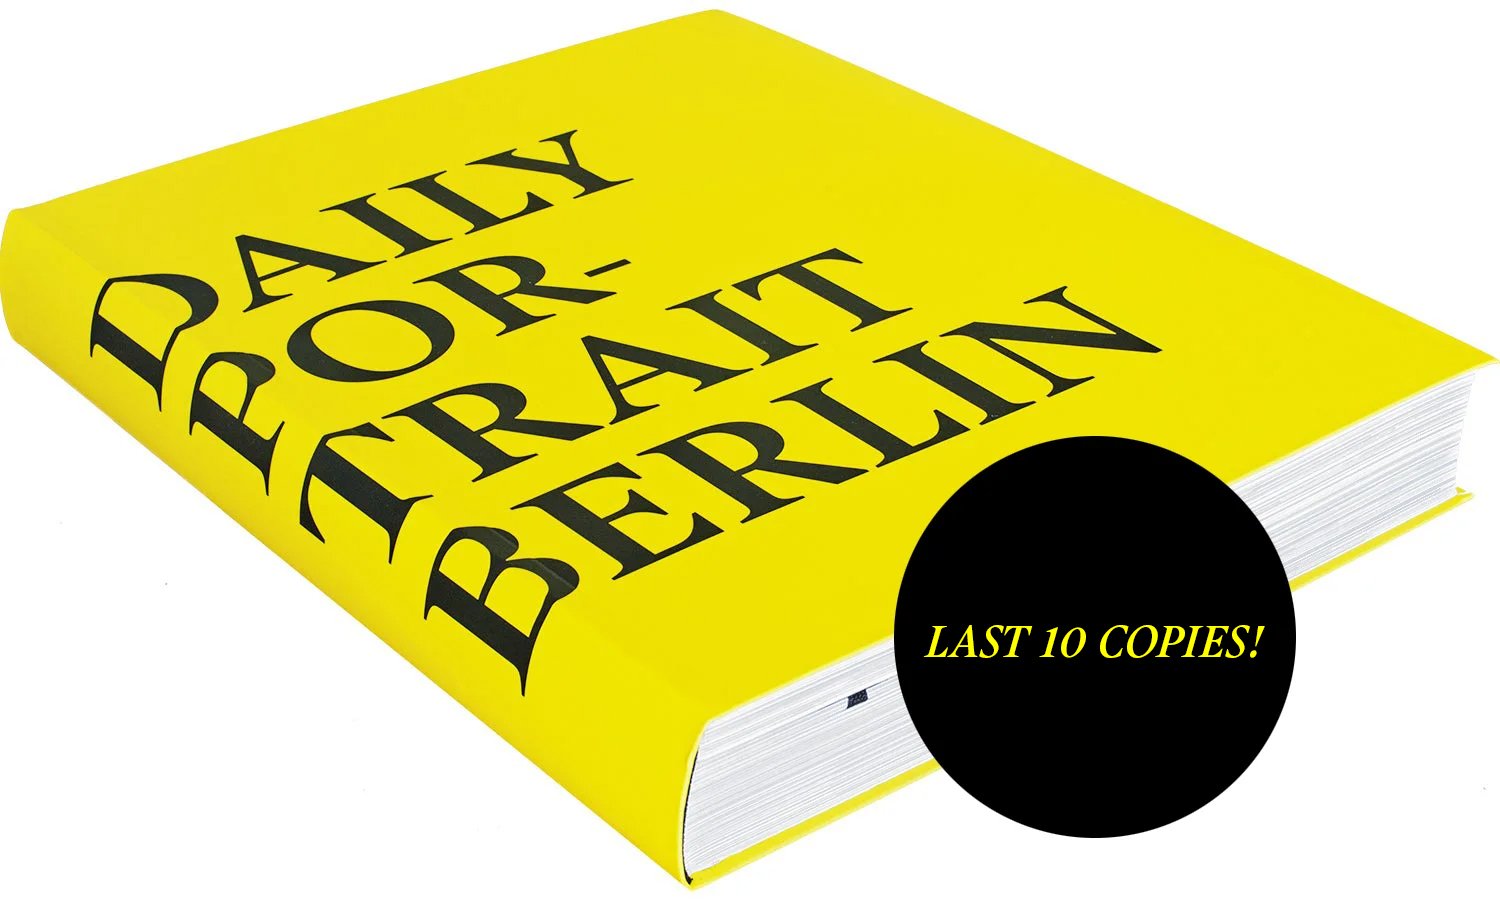 Image of daily portrait berlin book